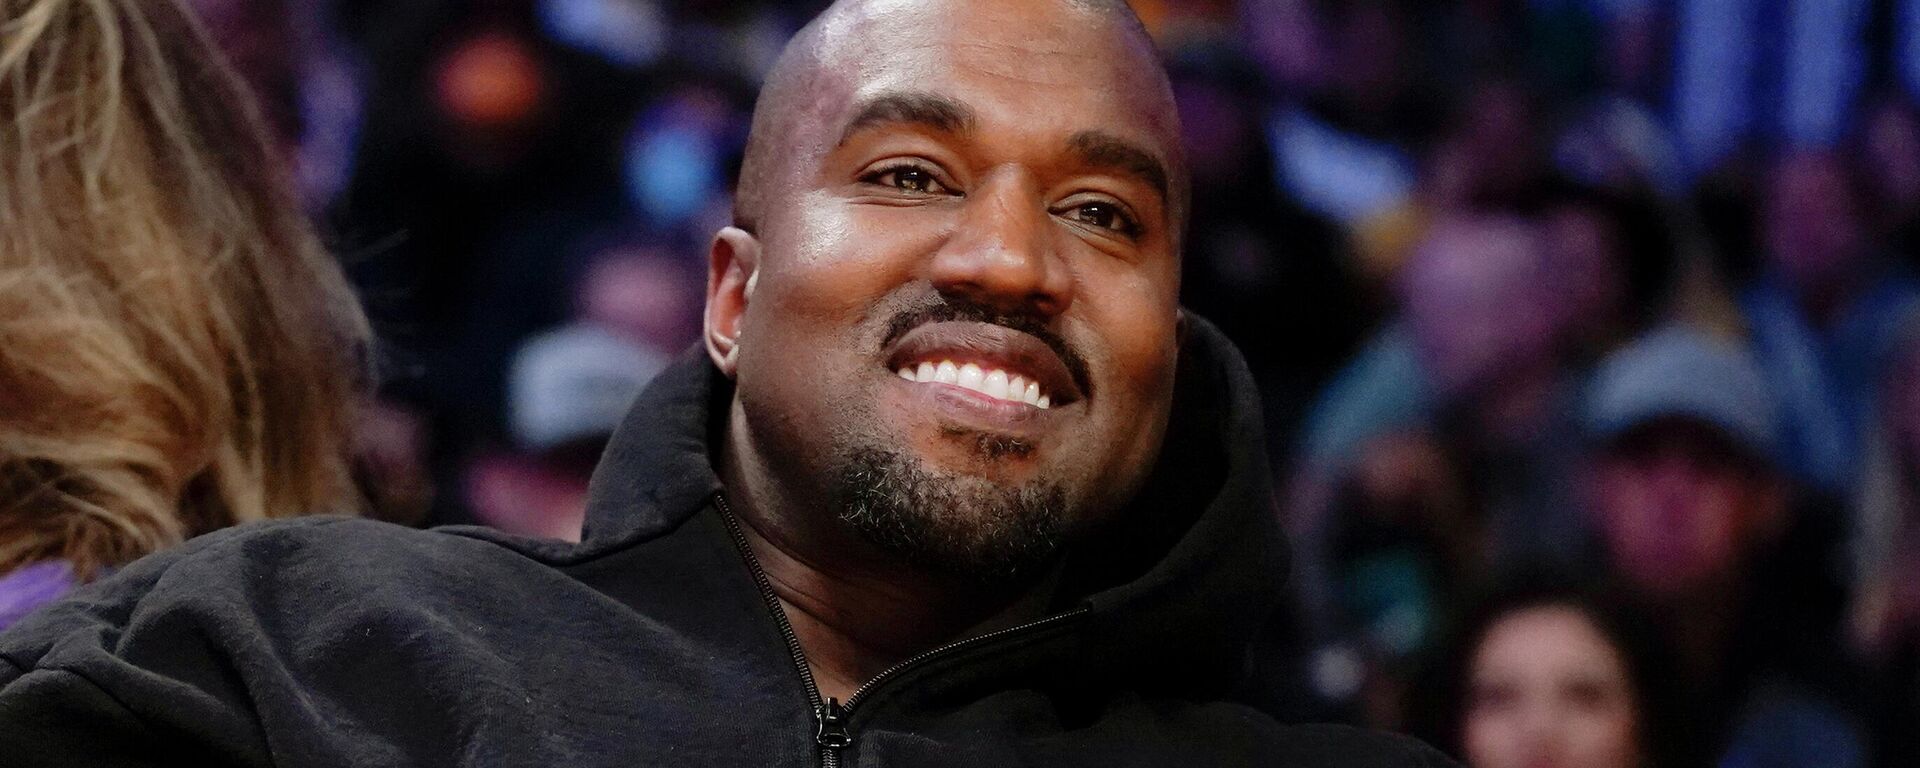 FILE - Kanye West watches the first half of an NBA basketball game between the Washington Wizards and the Los Angeles Lakers in Los Angeles, on March 11, 2022 A completed documentary about the rapper formerly known as Kanye West has been shelved amid his recent slew of antisemitic remark - Sputnik International, 1920, 31.10.2022